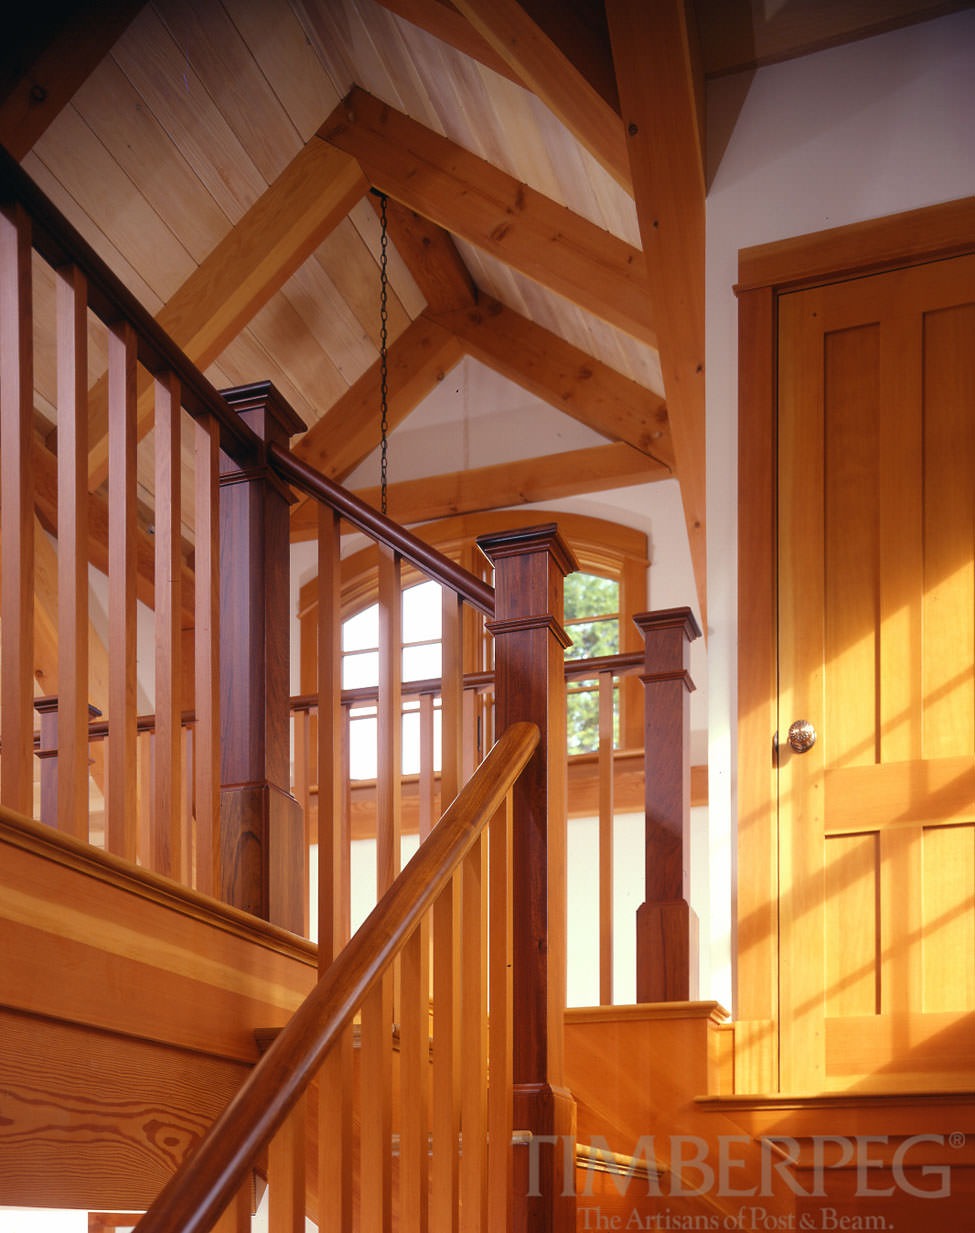 Sunset II, ME (5771) stairway and timber frame ceiling